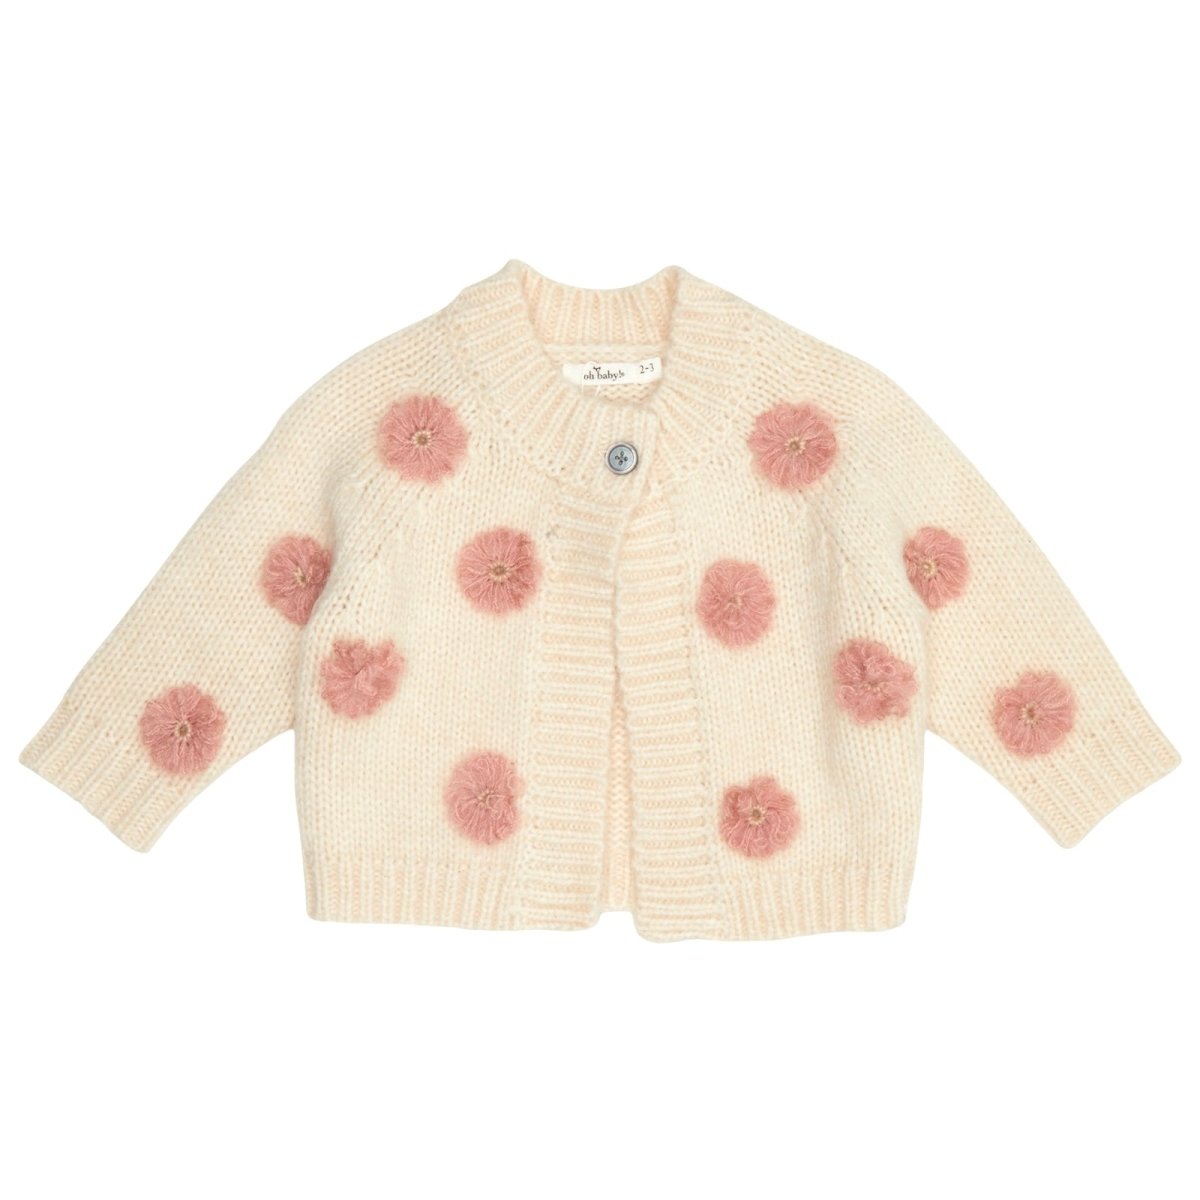 SCANDI FLORAL KNITTED CARDIGAN - OH BABY!